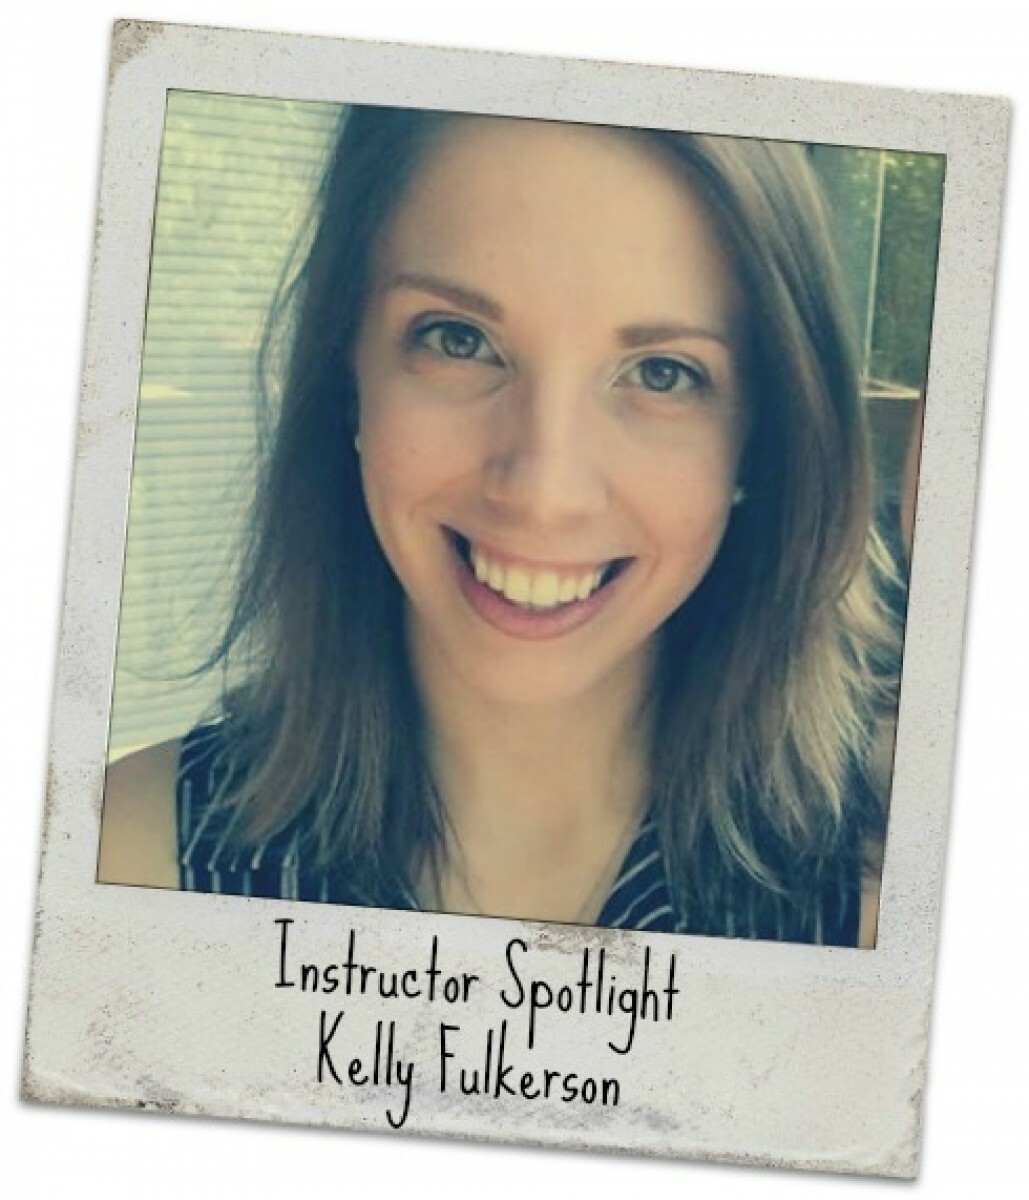 Polaroid style picture of Kelly Fulkerson with 'Instructor Spotlight Kelly Fulkerson'